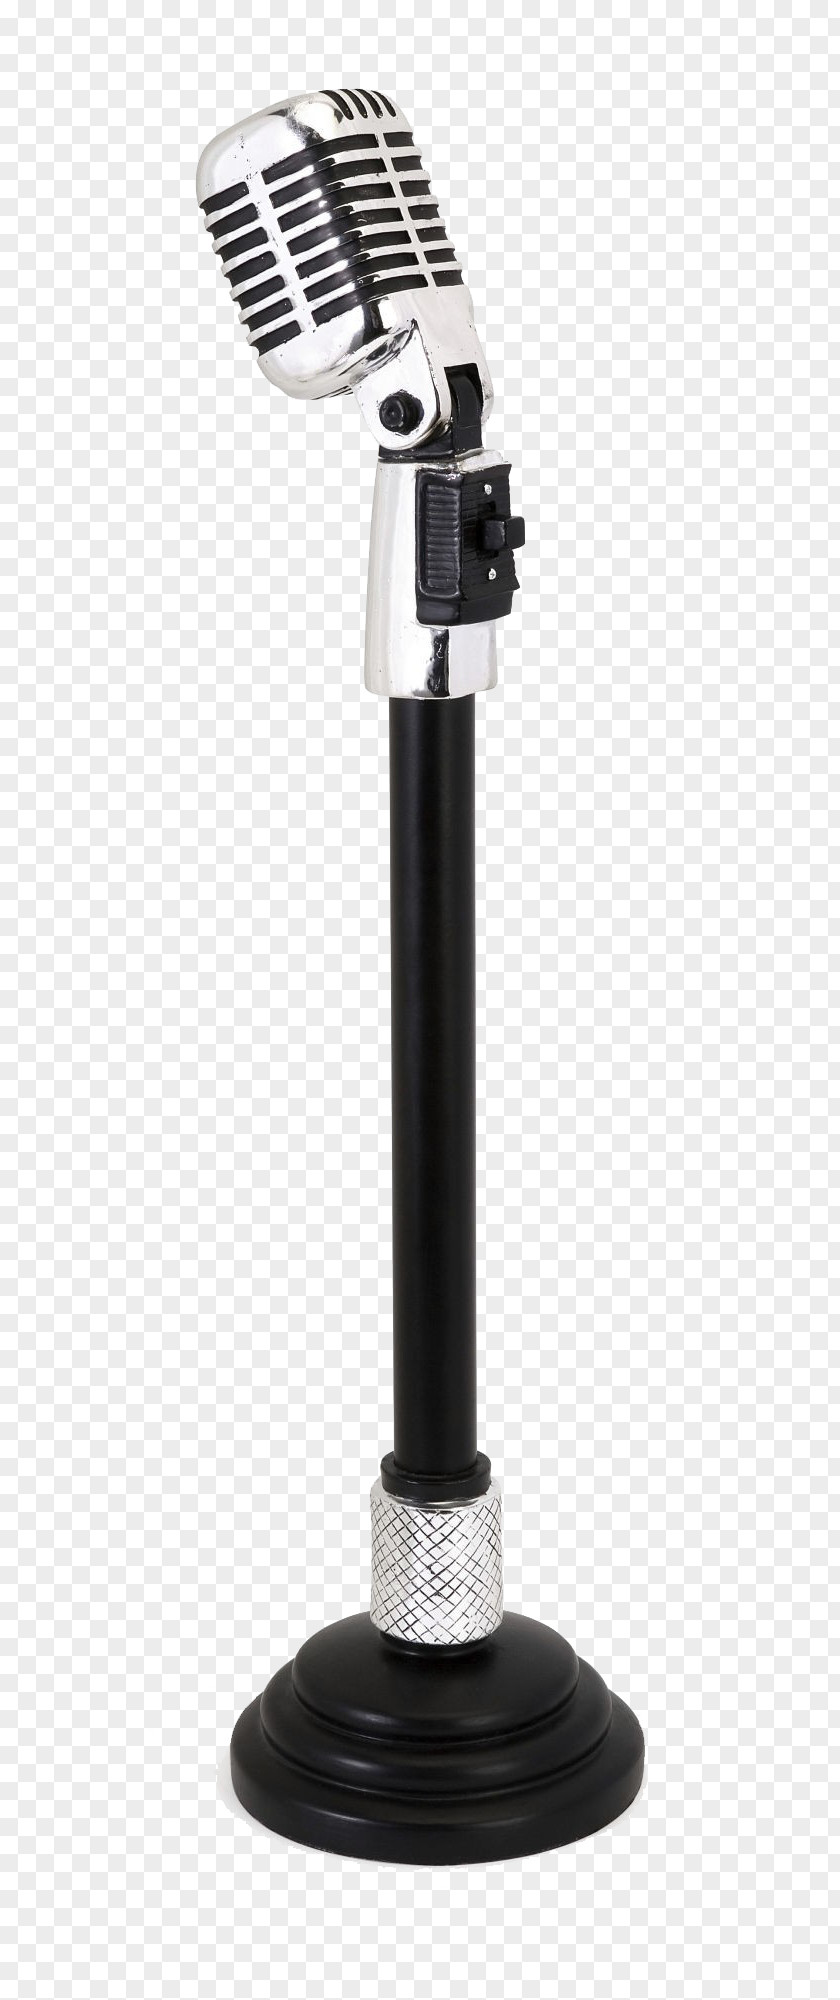 Microphone Stands Blue Microphones Yeti Recording Studio IPad Air PNG